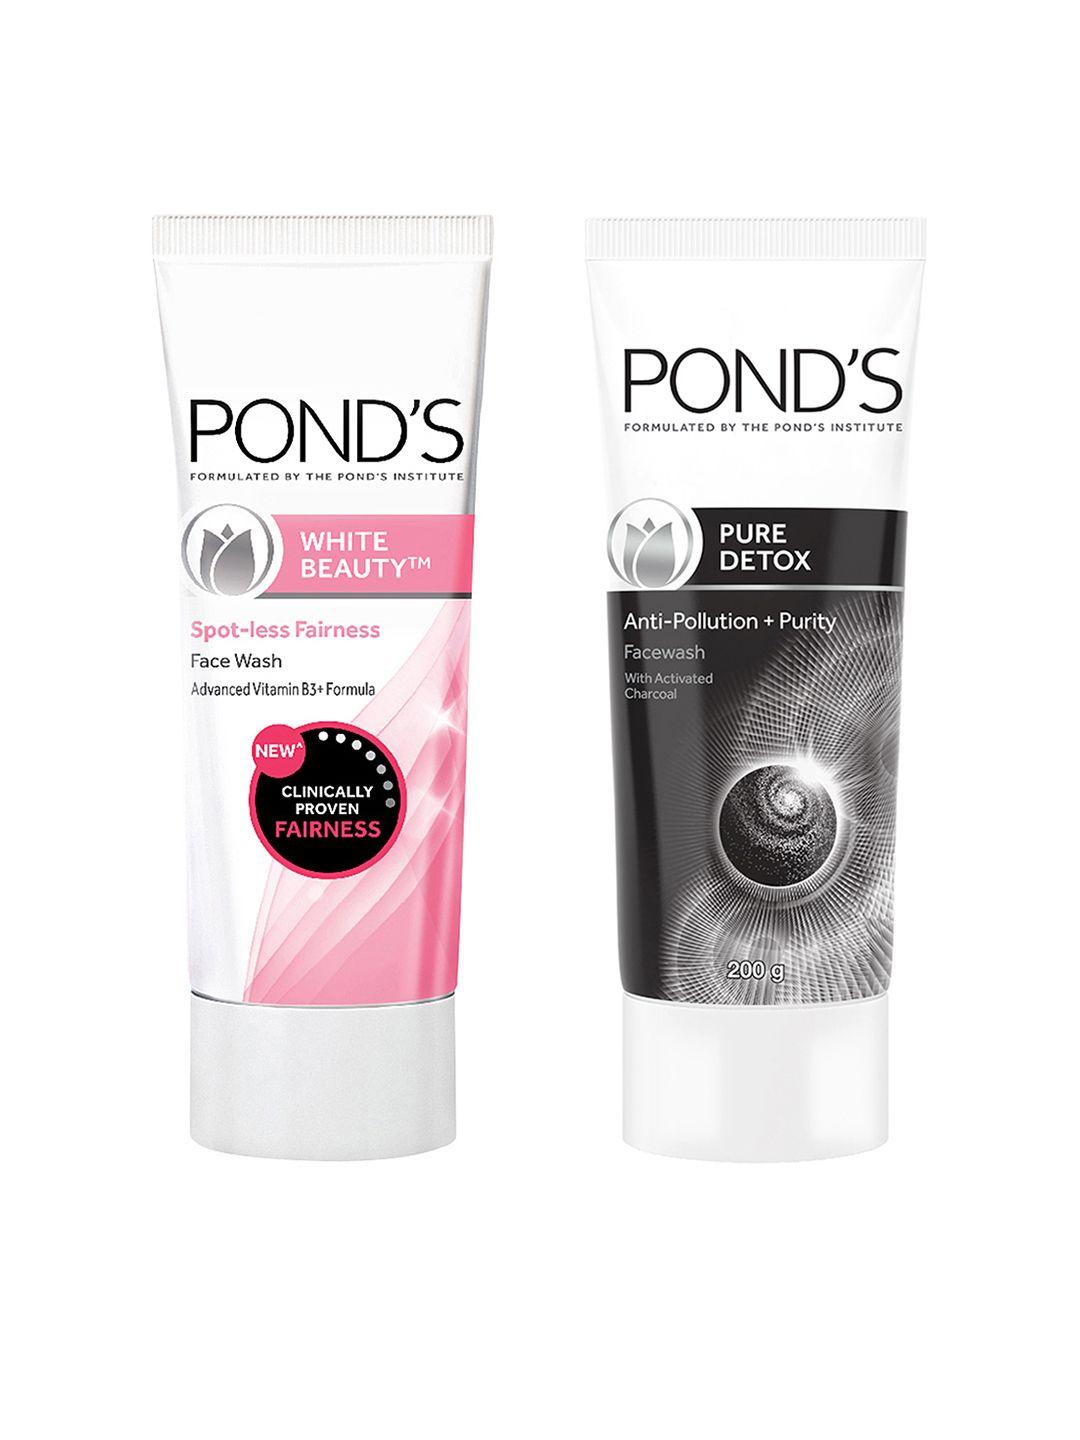 ponds set of white beauty spotless fairness & anti pollution activated charcoal face wash